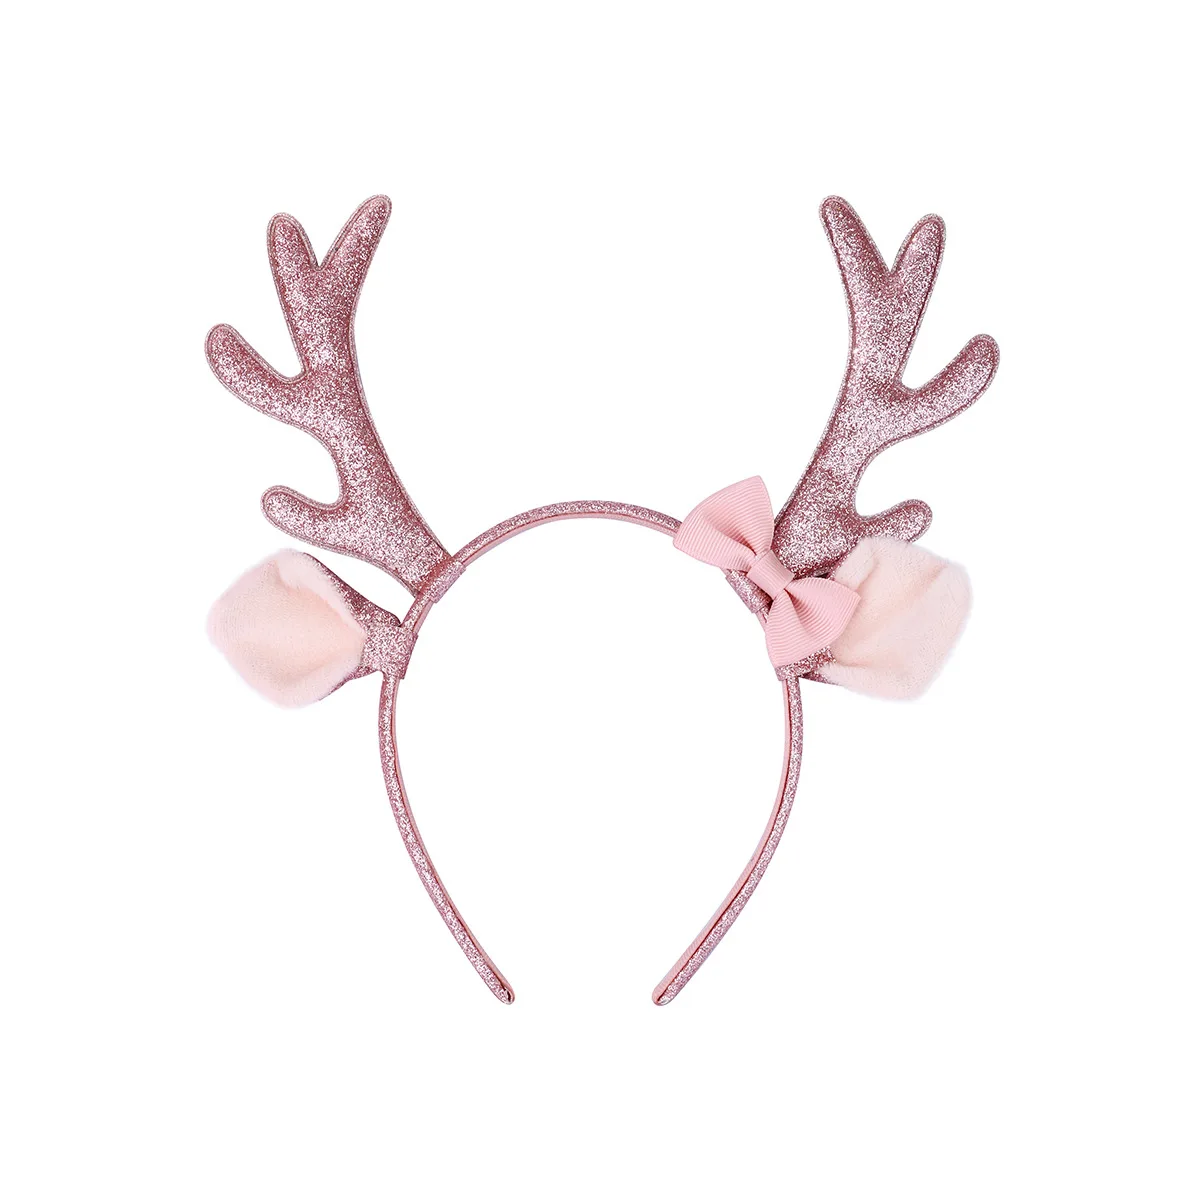 

10pcs Glitter Reindeer Ears Hairbands Solid Antlers Bow Hard Headband XMAS Party Headwear Boutique Hair Accessories for Girls